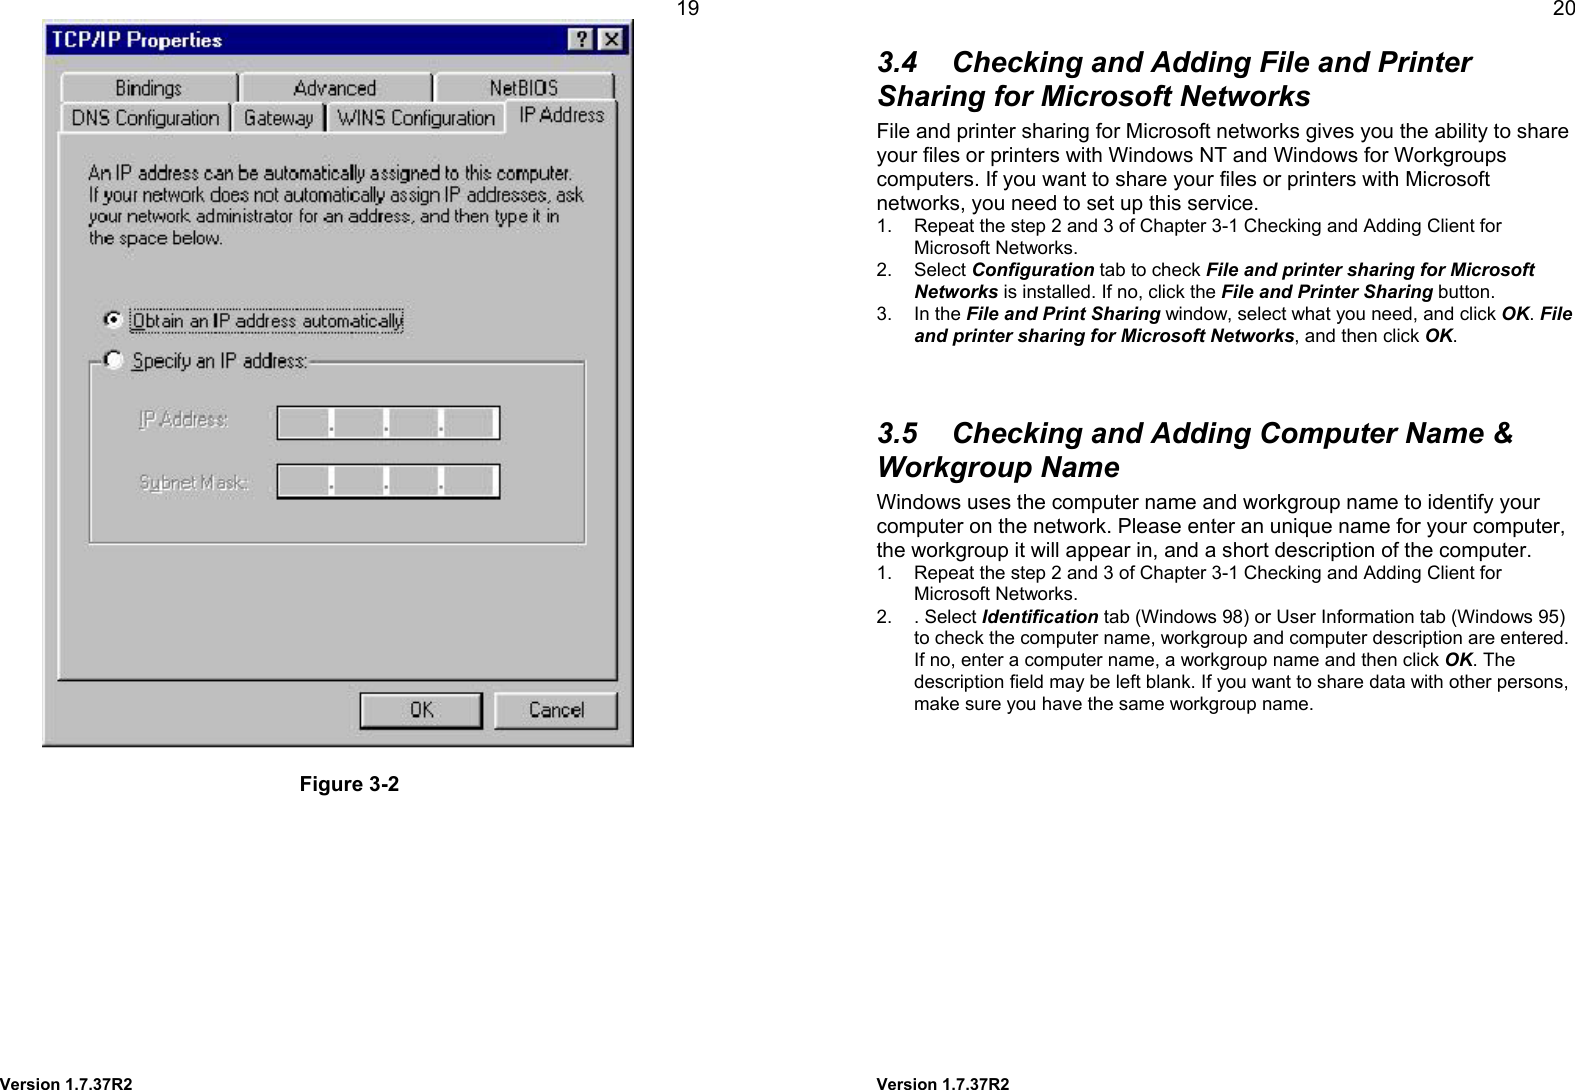  Version 1.7.37R2 19   Figure 3-2   Version 1.7.37R2 20 3.4  Checking and Adding File and Printer Sharing for Microsoft Networks File and printer sharing for Microsoft networks gives you the ability to share your files or printers with Windows NT and Windows for Workgroups computers. If you want to share your files or printers with Microsoft networks, you need to set up this service. 1.  Repeat the step 2 and 3 of Chapter 3-1 Checking and Adding Client for Microsoft Networks. 2. Select Configuration tab to check File and printer sharing for Microsoft Networks is installed. If no, click the File and Printer Sharing button. 3. In the File and Print Sharing window, select what you need, and click OK. File and printer sharing for Microsoft Networks, and then click OK.   3.5  Checking and Adding Computer Name &amp; Workgroup Name Windows uses the computer name and workgroup name to identify your computer on the network. Please enter an unique name for your computer, the workgroup it will appear in, and a short description of the computer. 1.  Repeat the step 2 and 3 of Chapter 3-1 Checking and Adding Client for Microsoft Networks. 2. . Select Identification tab (Windows 98) or User Information tab (Windows 95) to check the computer name, workgroup and computer description are entered. If no, enter a computer name, a workgroup name and then click OK. The description field may be left blank. If you want to share data with other persons, make sure you have the same workgroup name.   